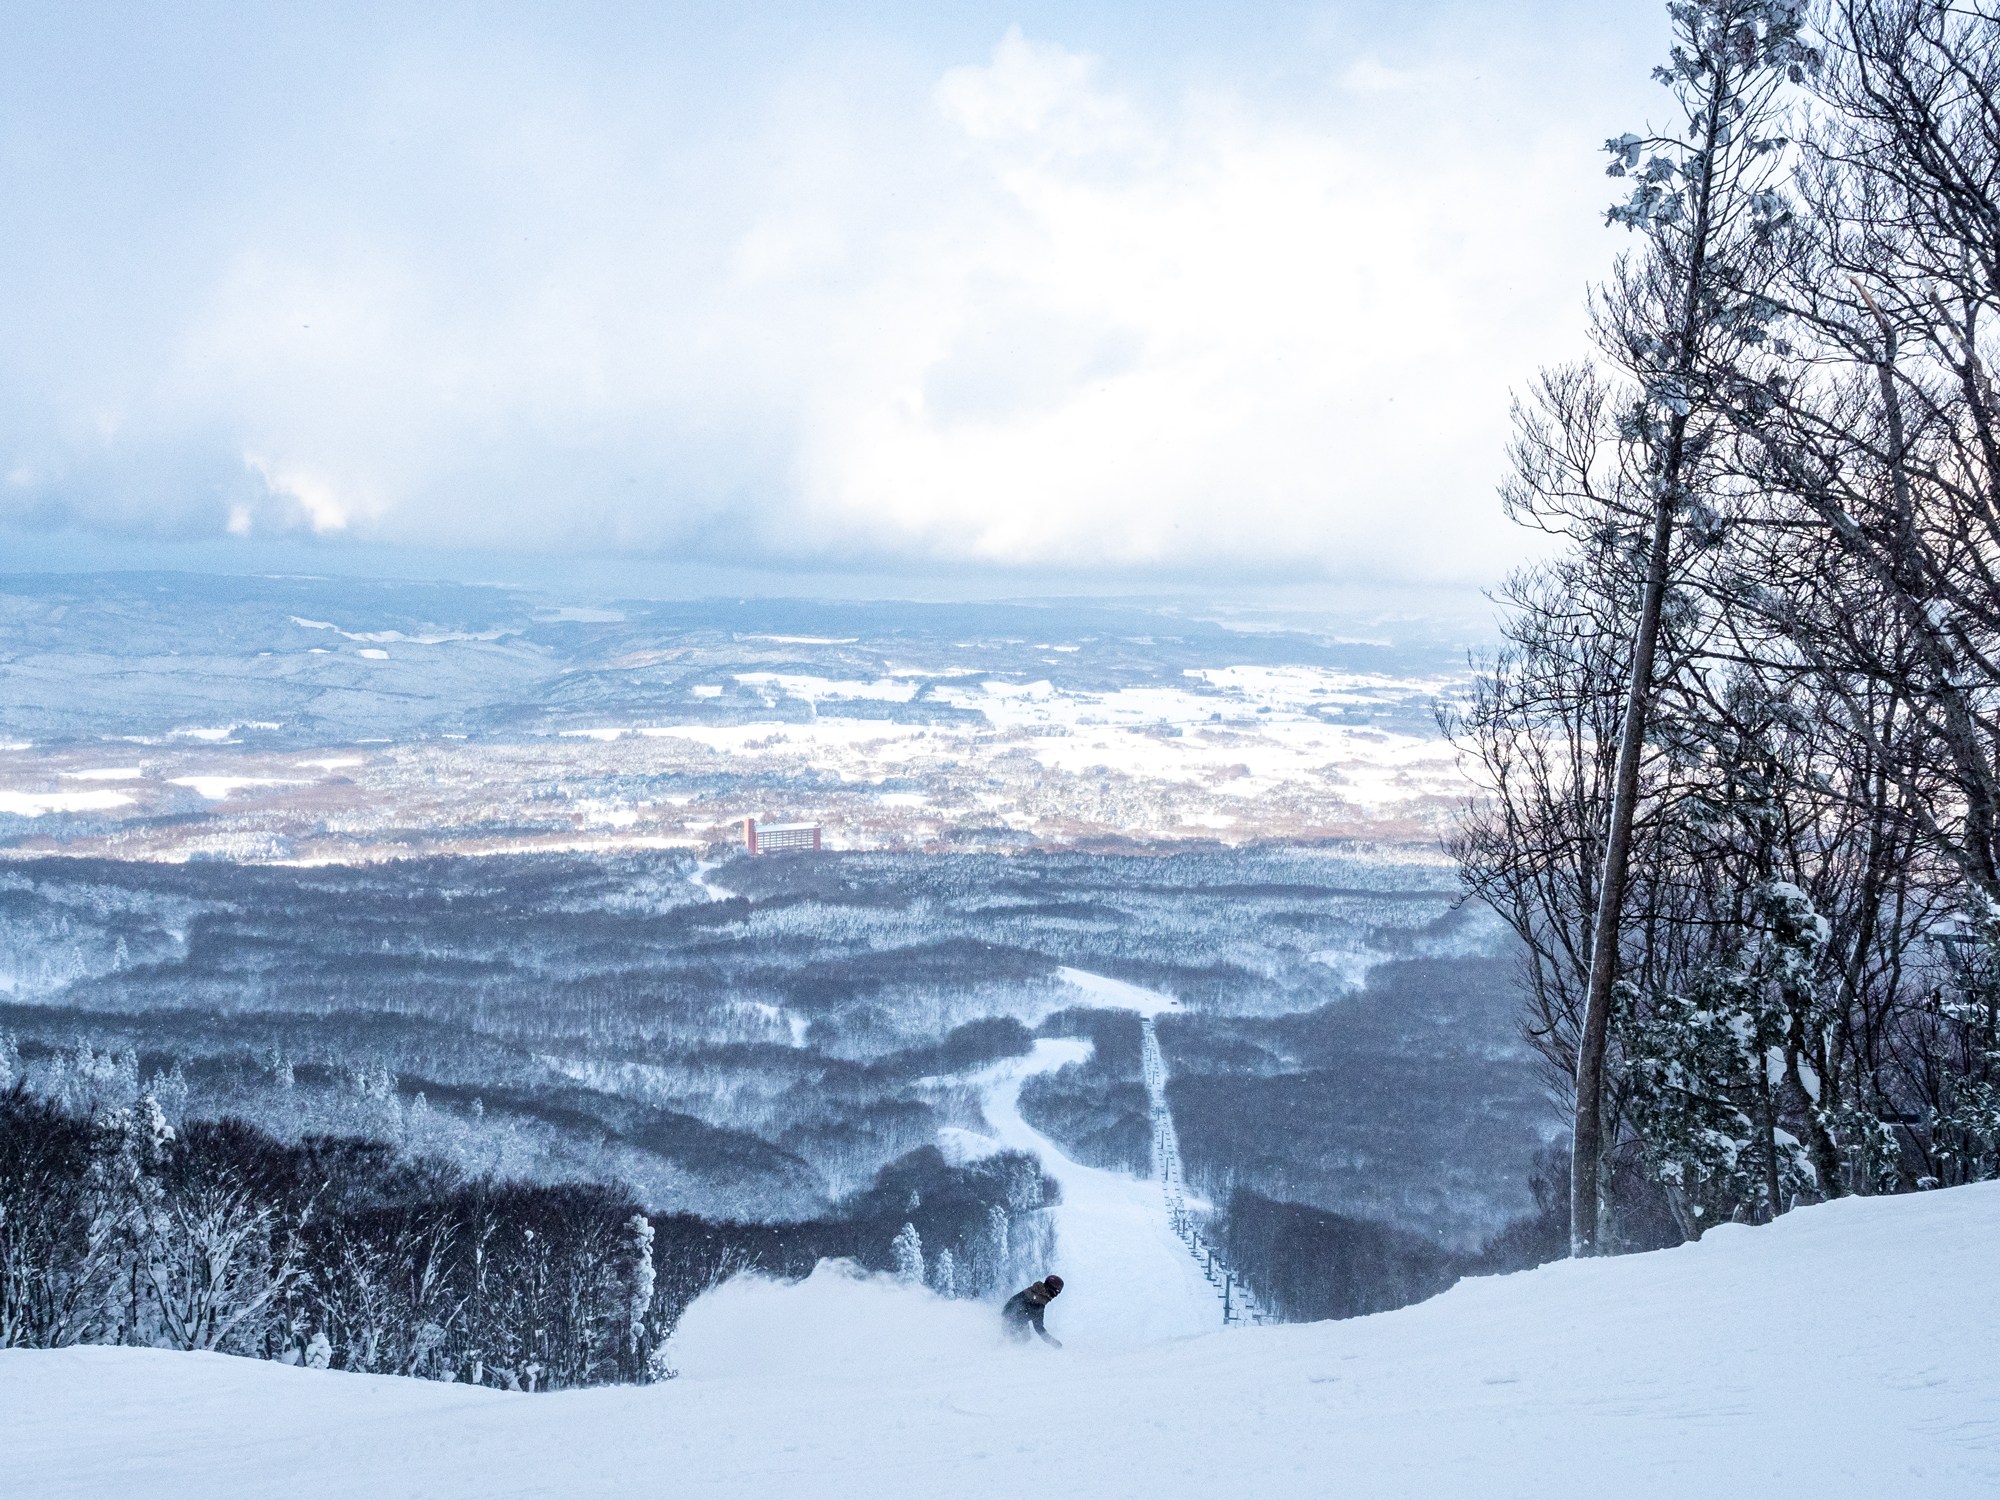 View of Sea of Japan from Aomori Spring Resort with snowboarder carving powder